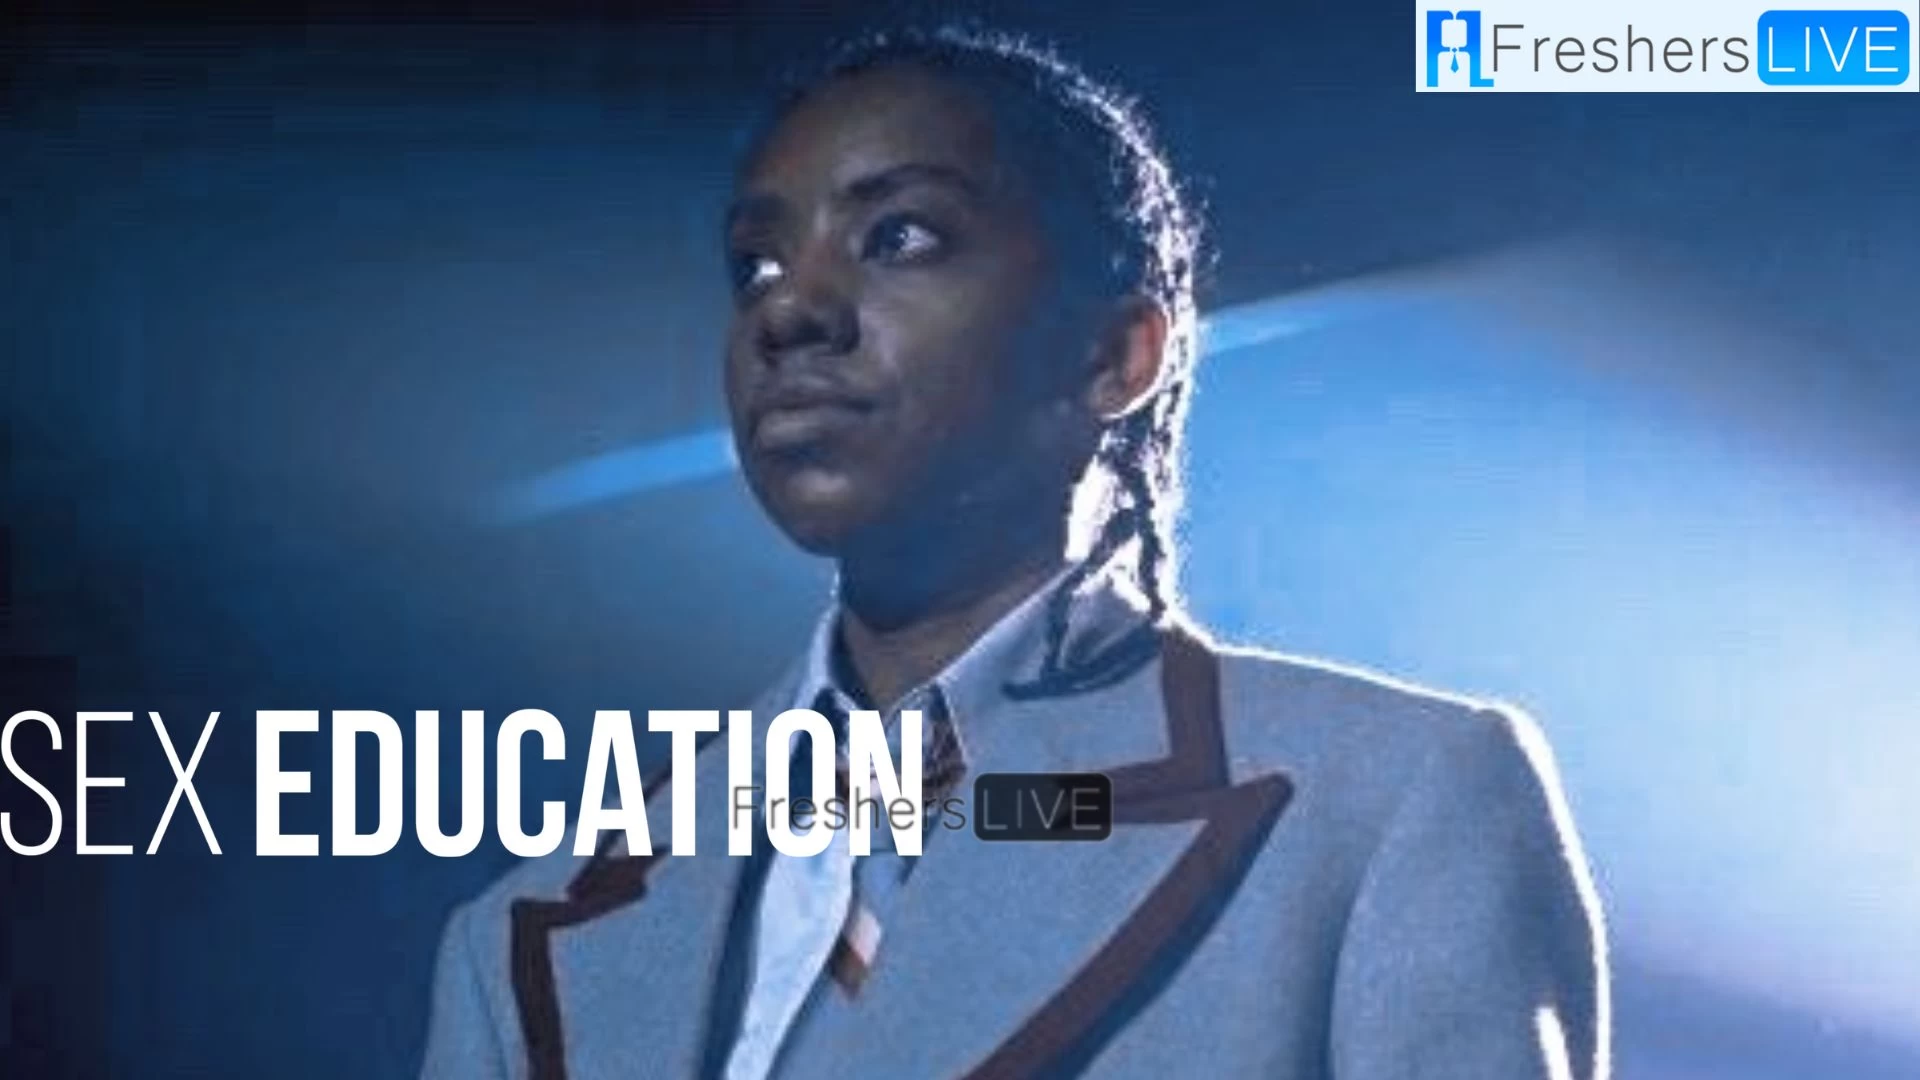 Who Plays God in Sex Education? Who is Jodie Turner Smith?